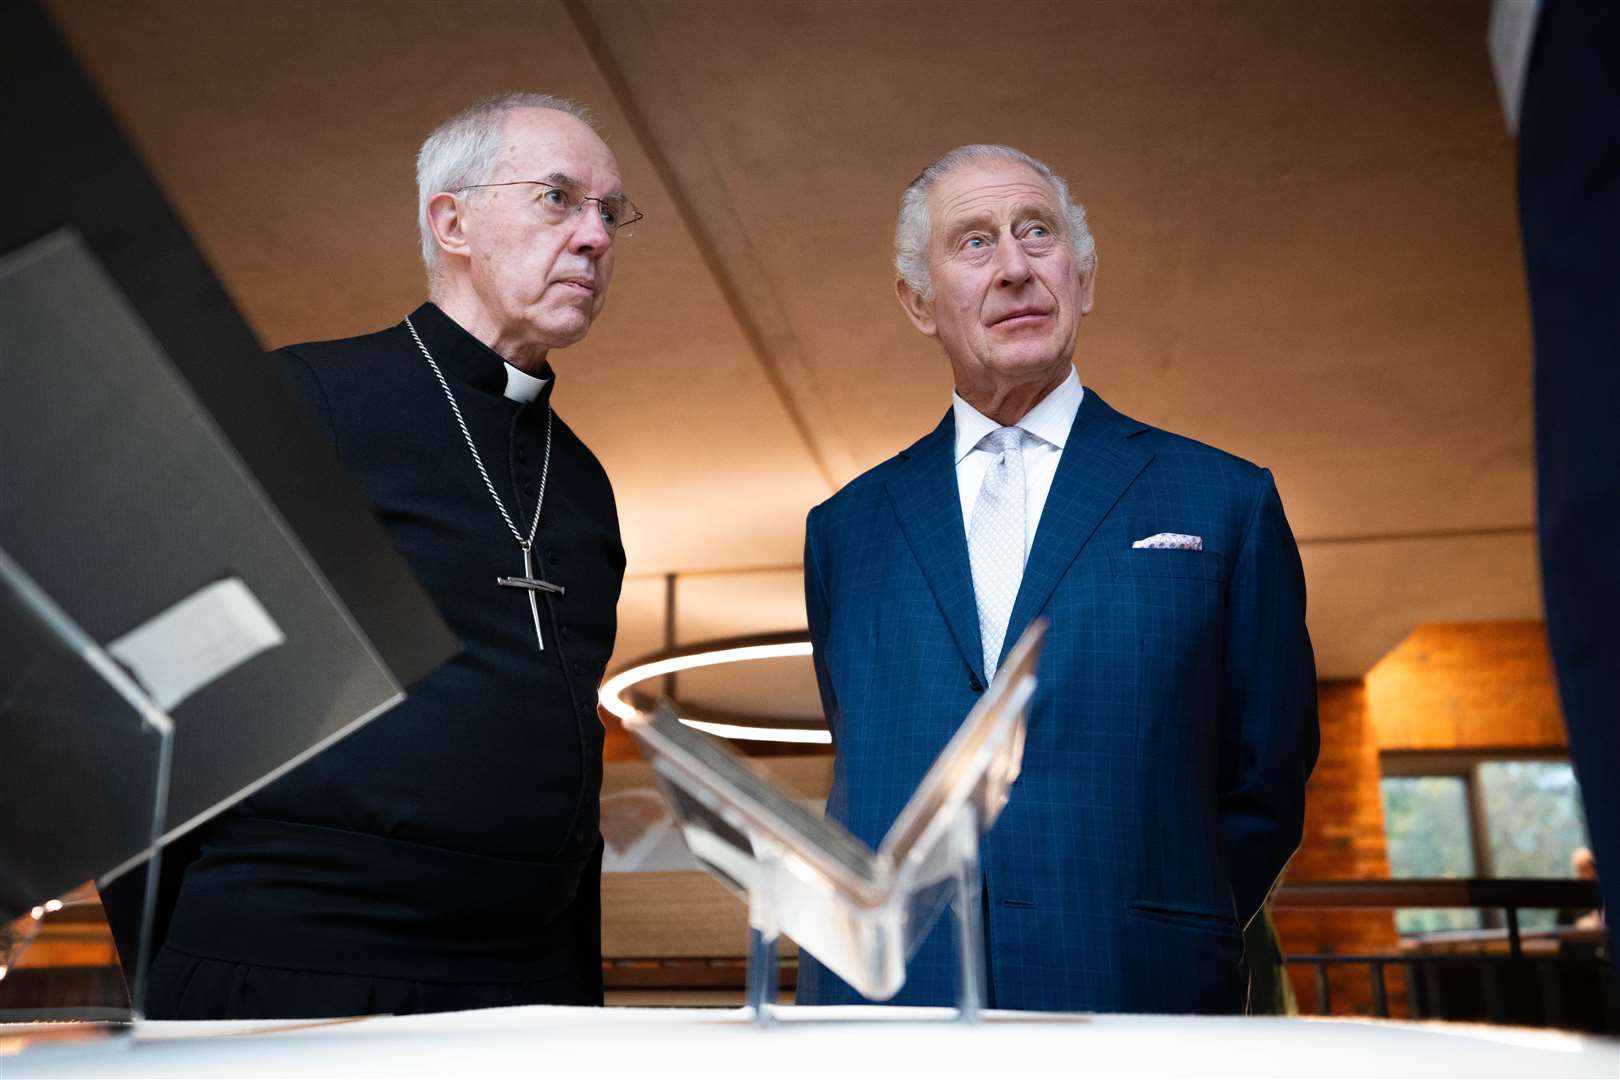 Charles and the Archbishop of Canterbury Justin Welby at the reception of faith leaders in Lambeth Palace Library in London (James Manning/PA)